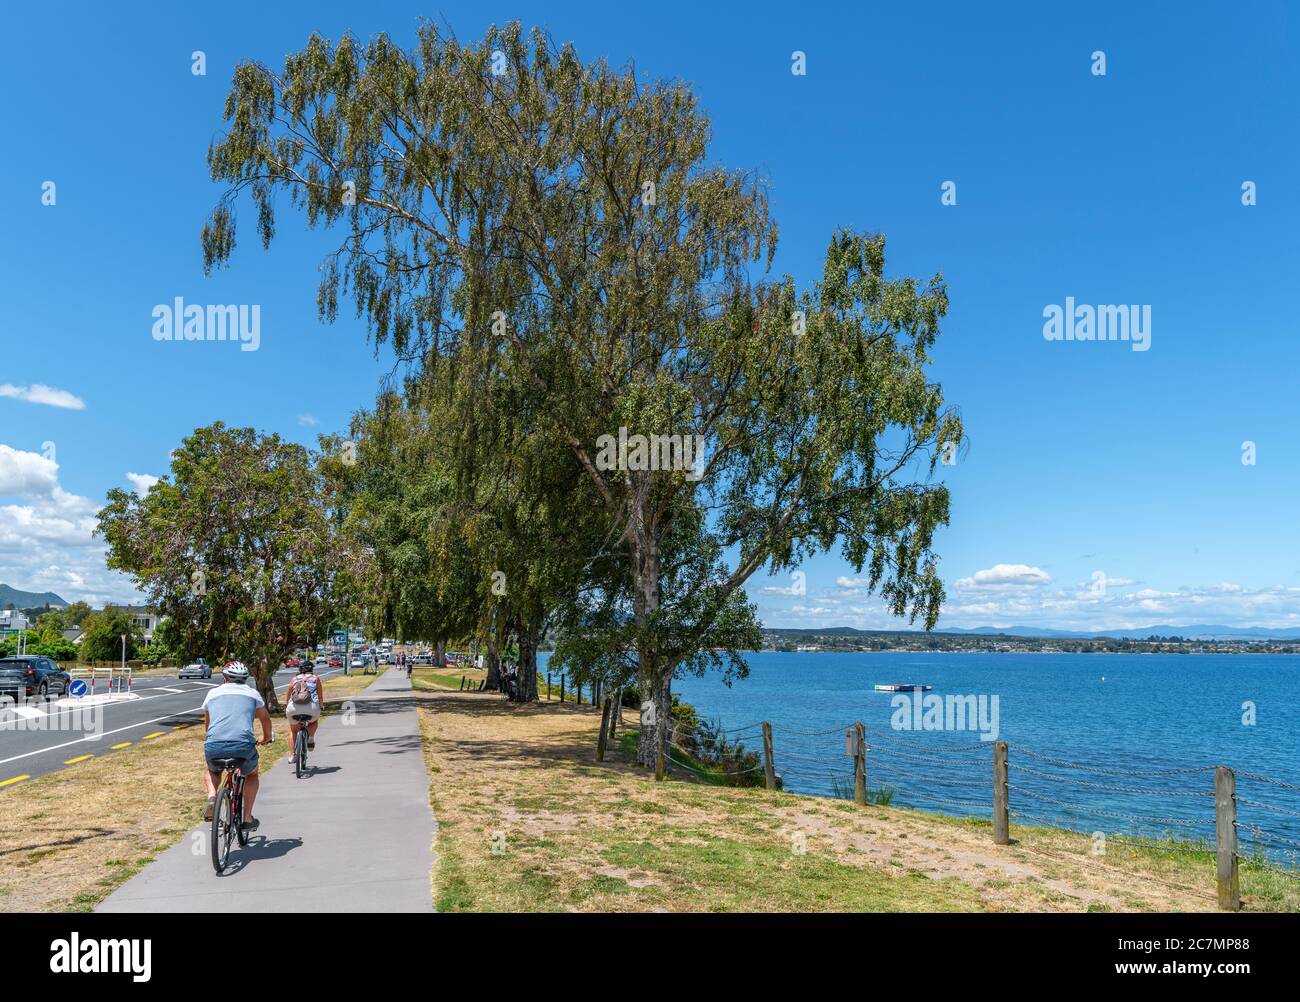 Cyclists on a lakefront path in Taupo, Lake Taupo, New Zealand Stock Photo